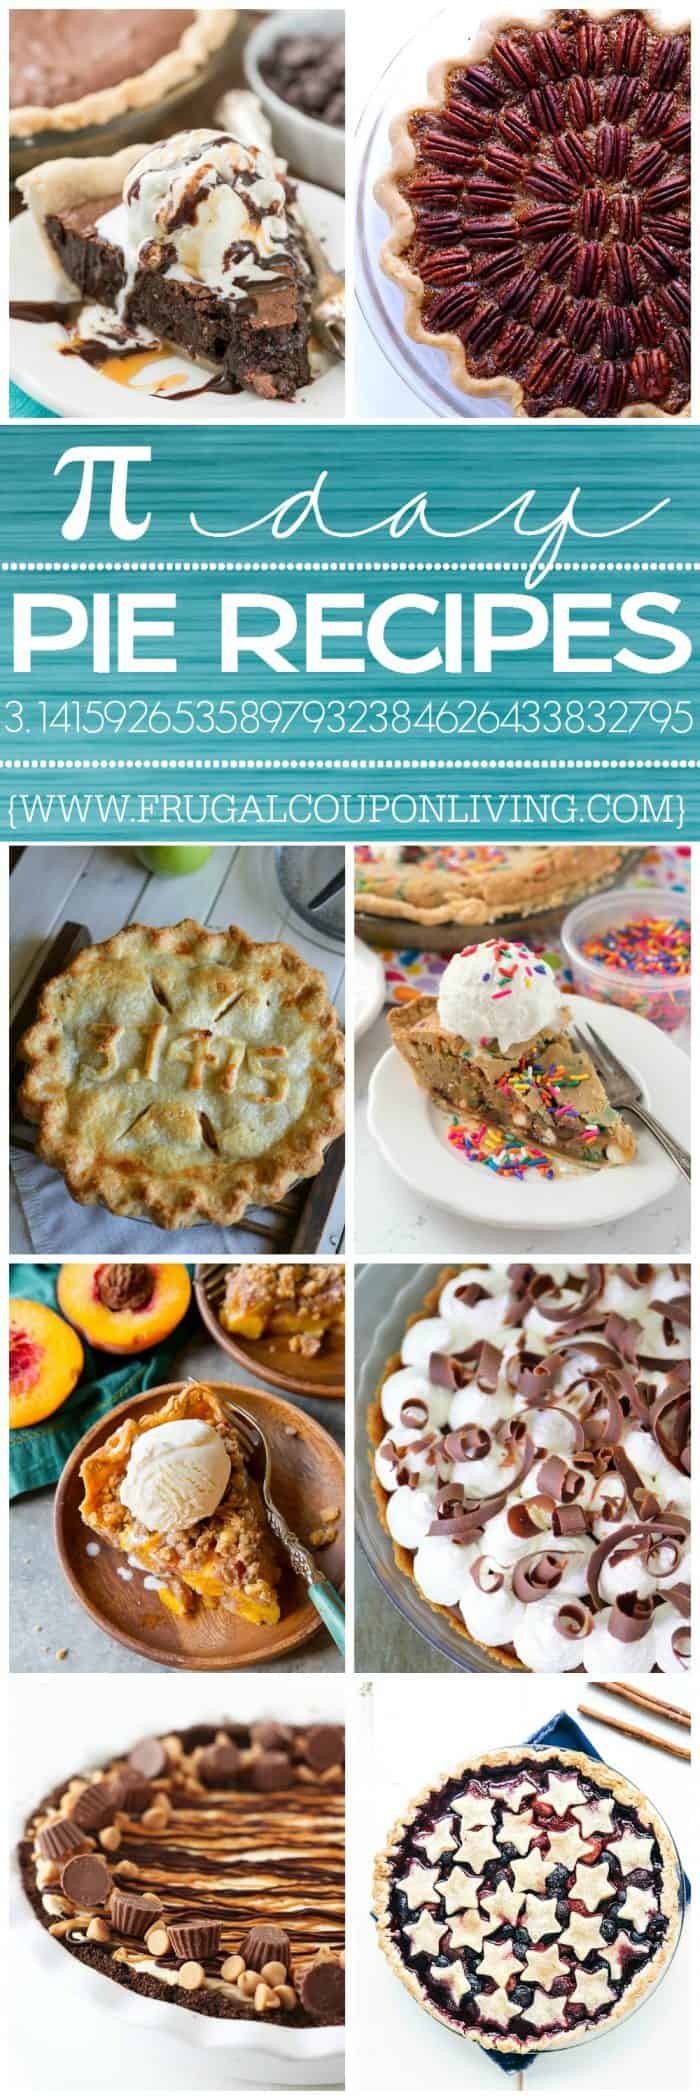 Pi Day Food Ideas
 Pi Day Recipes Pie Ideas for March 14th